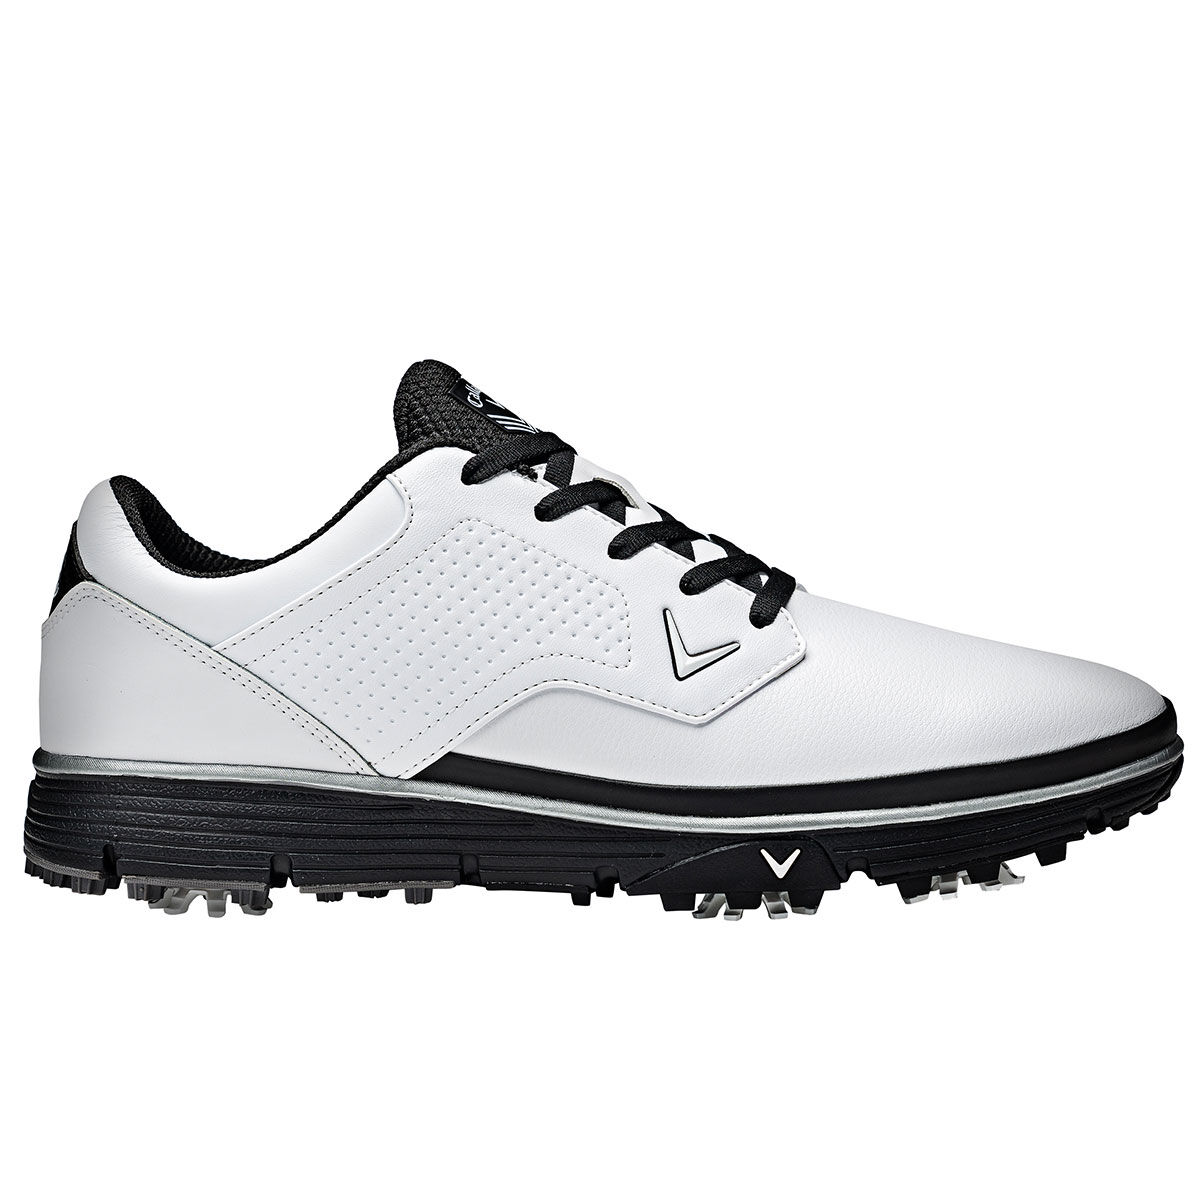 Callaway Golf Mens White and Black Lightweight Mission Waterproof Spiked Golf Shoes, Size: 8 | American Golf von Callaway Golf